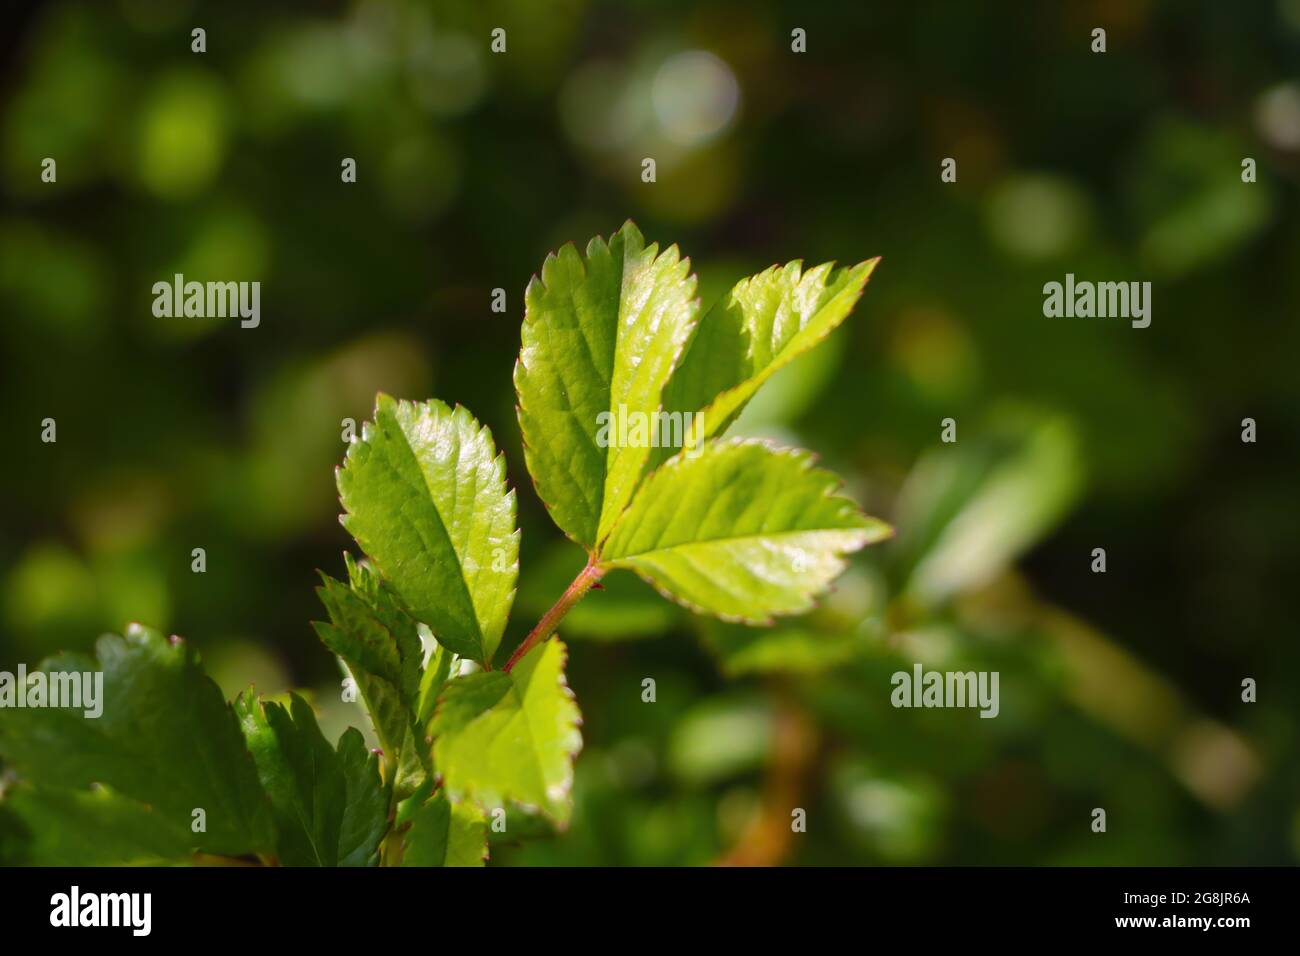 A young green leaf of a bush close-up in the park. Stock Photo